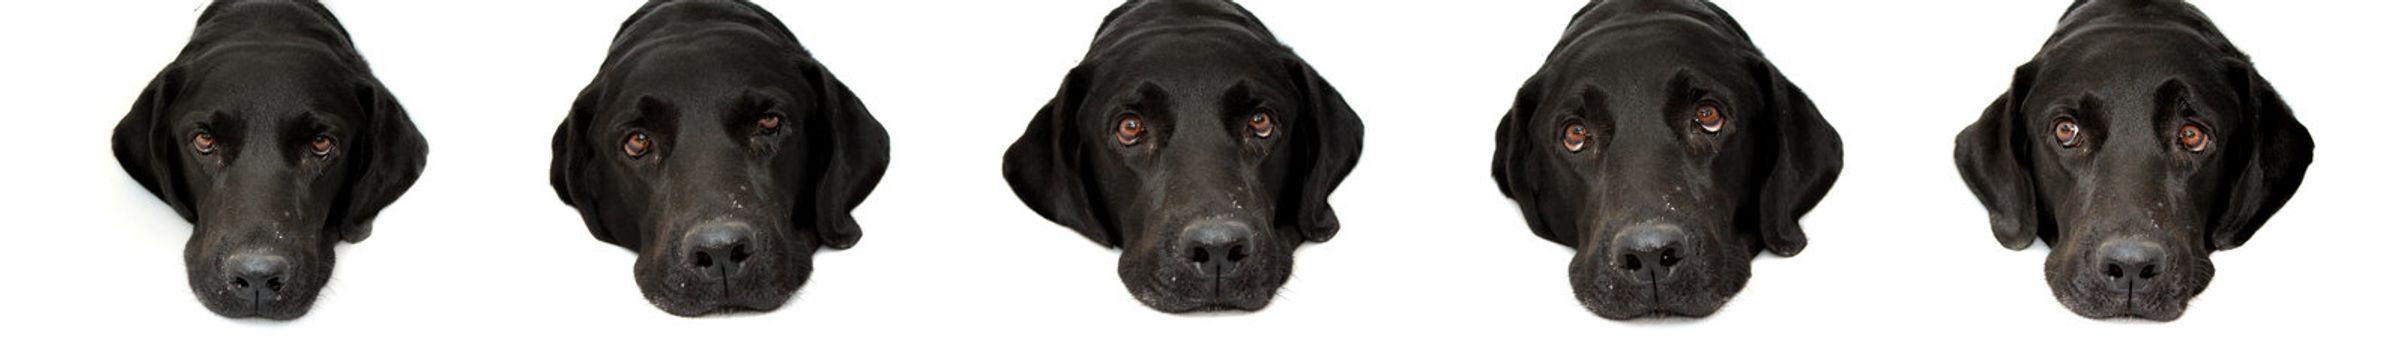 Various portraits with various expressions of a sad black labrador dog, isolated on white background.